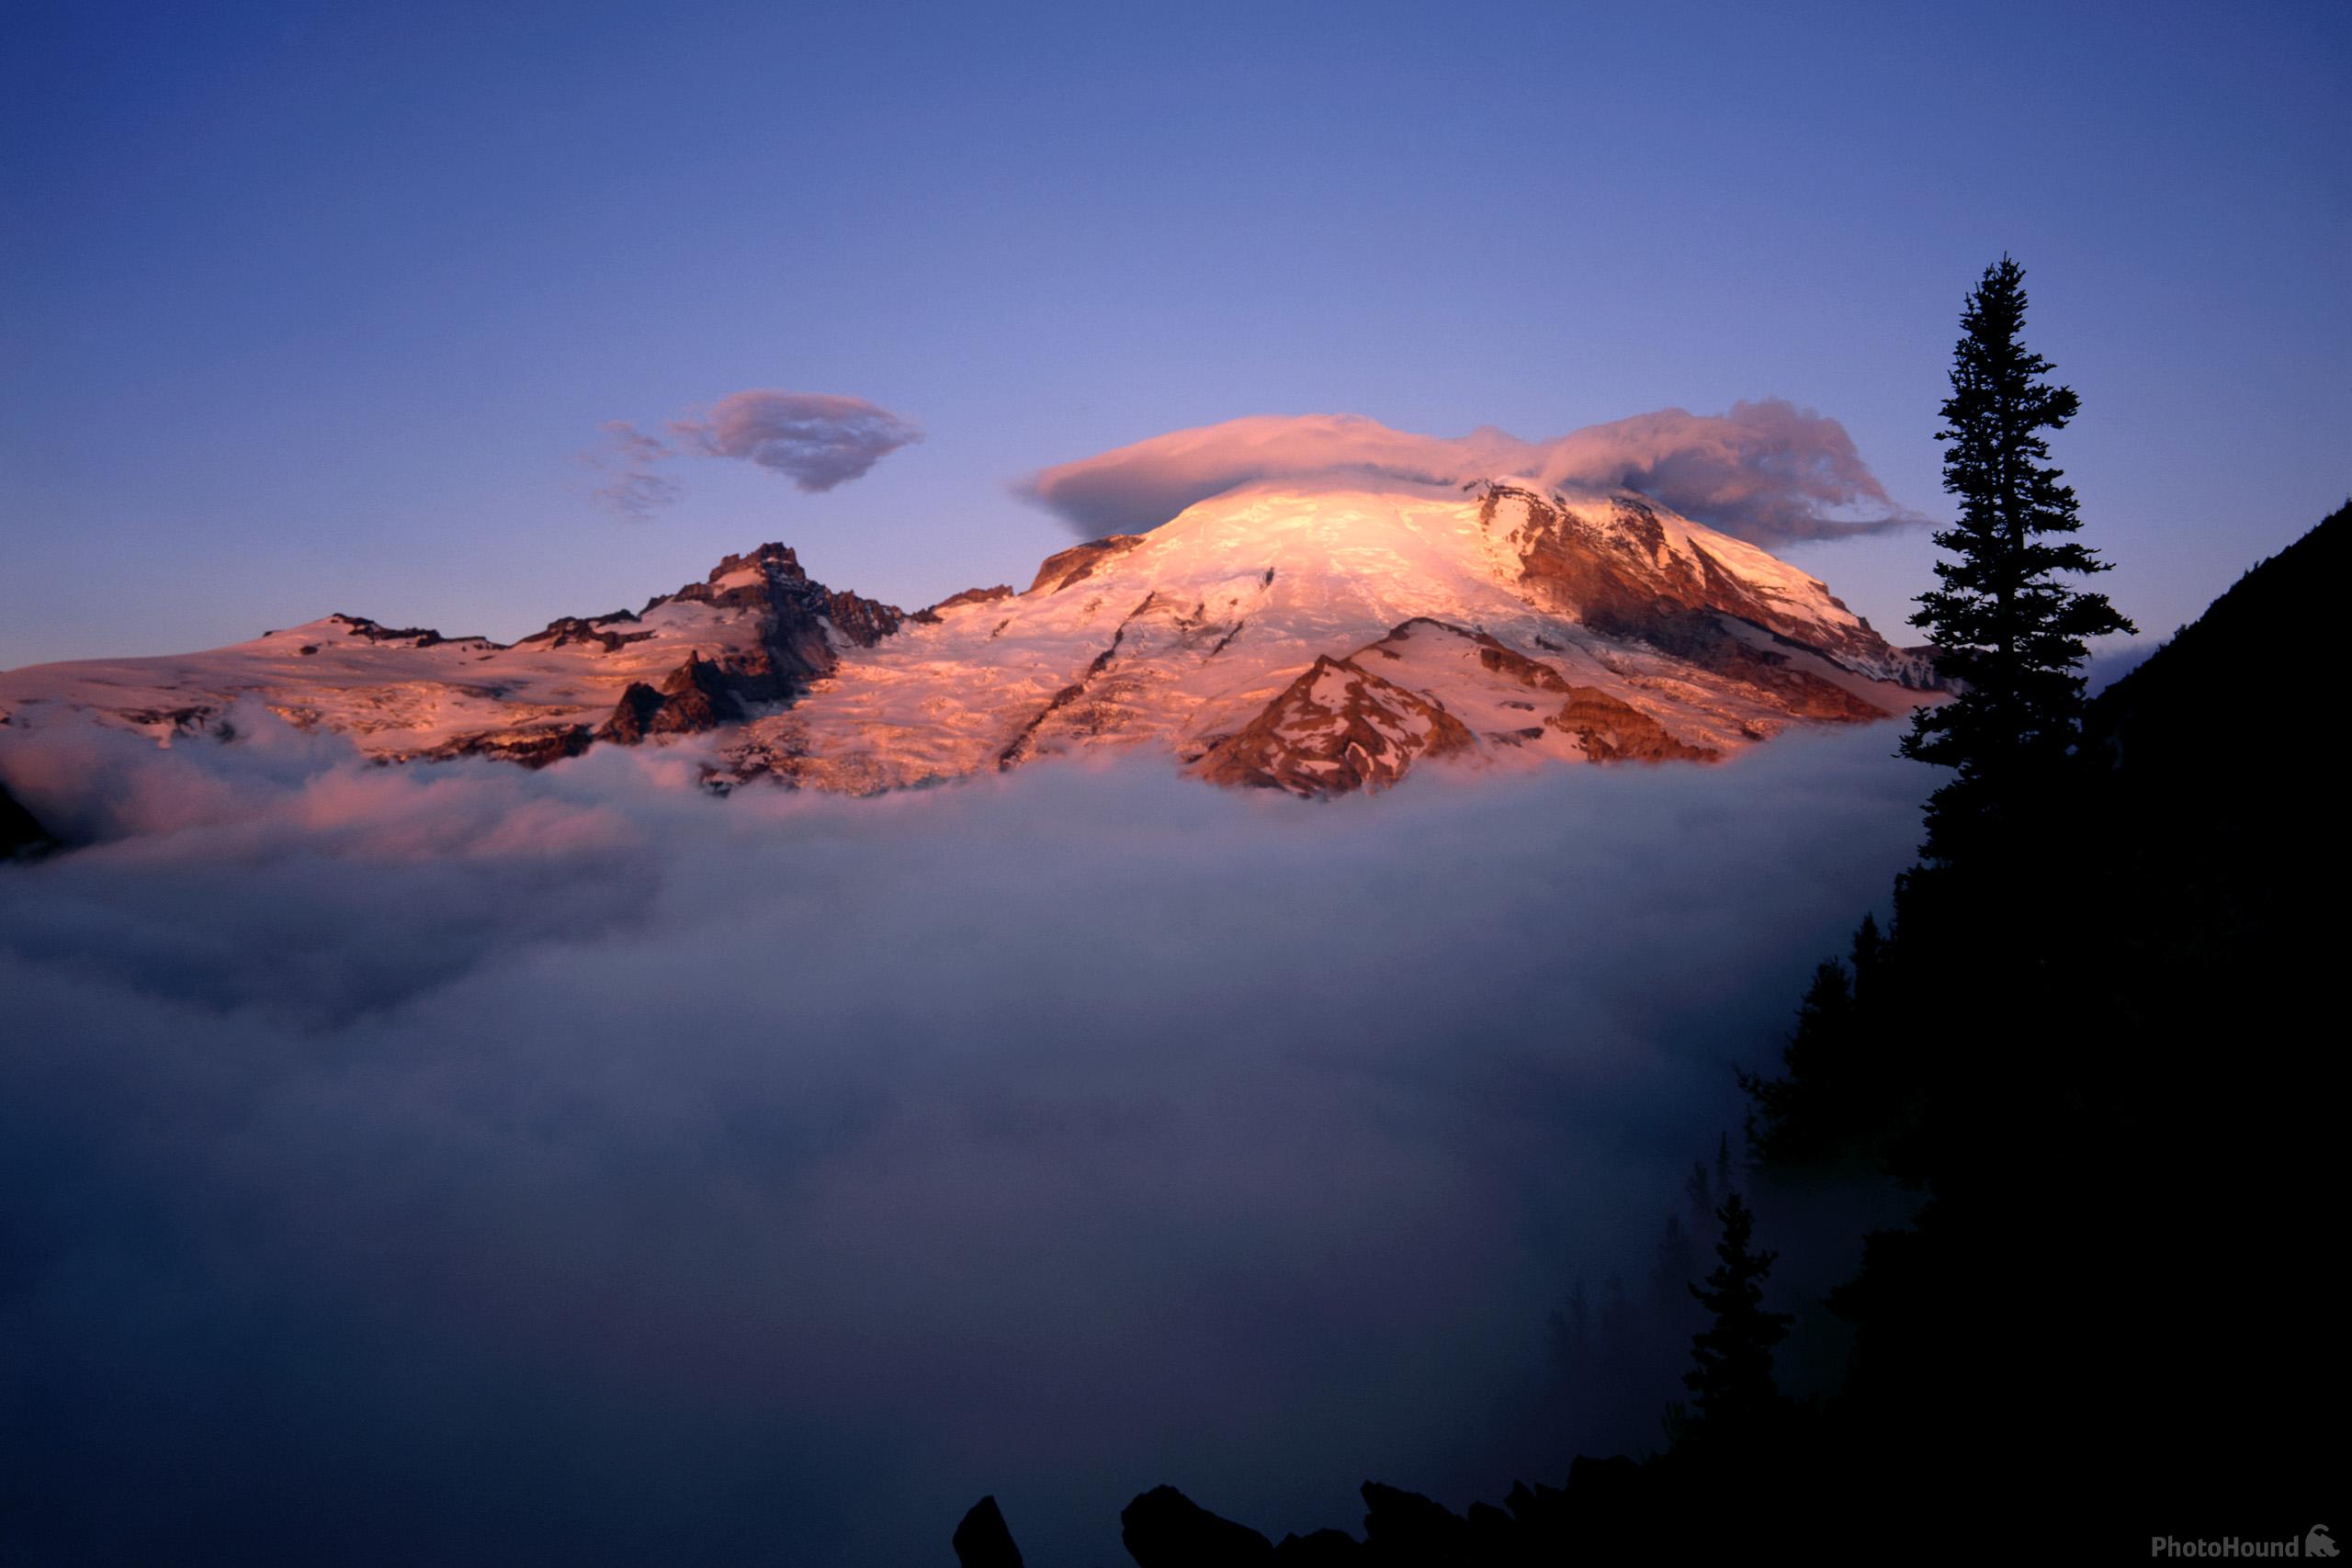 Image of Burroughs Mountain, Mount Rainier National Park by T. Kirkendall and V. Spring